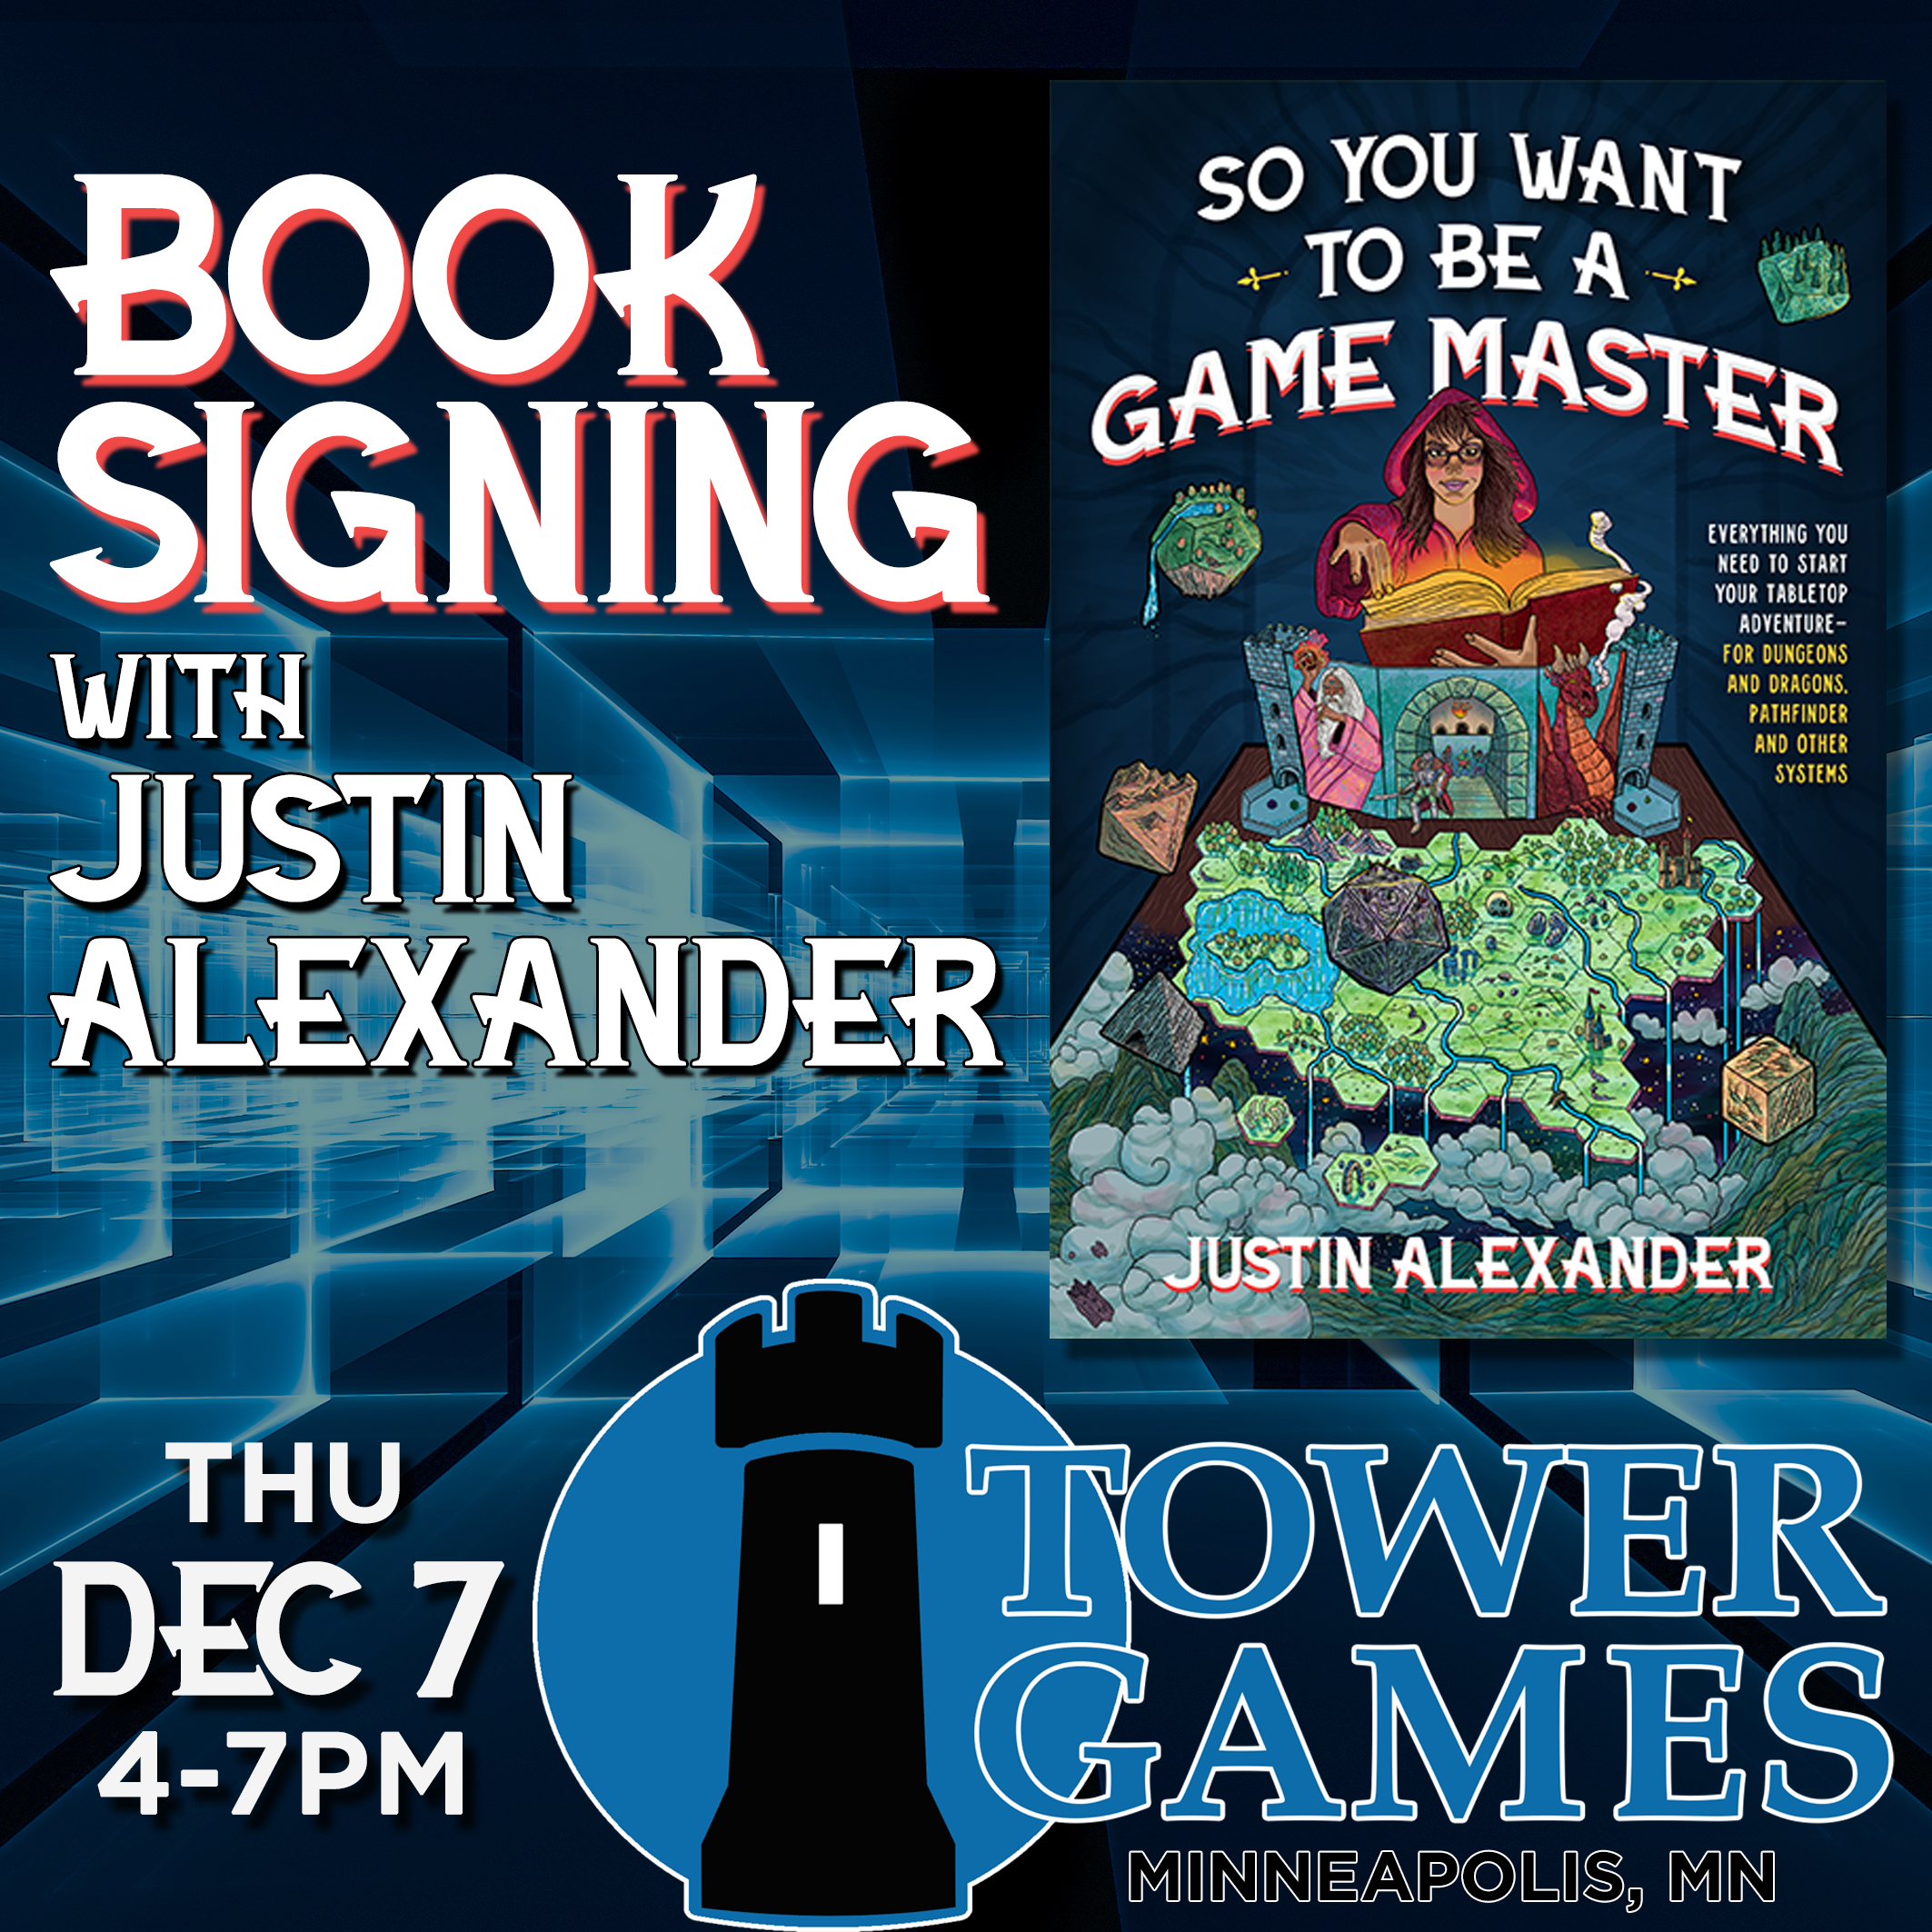 Book Signing - Tower Games (Minneapolis, MN) - December 8th, 4-7pm